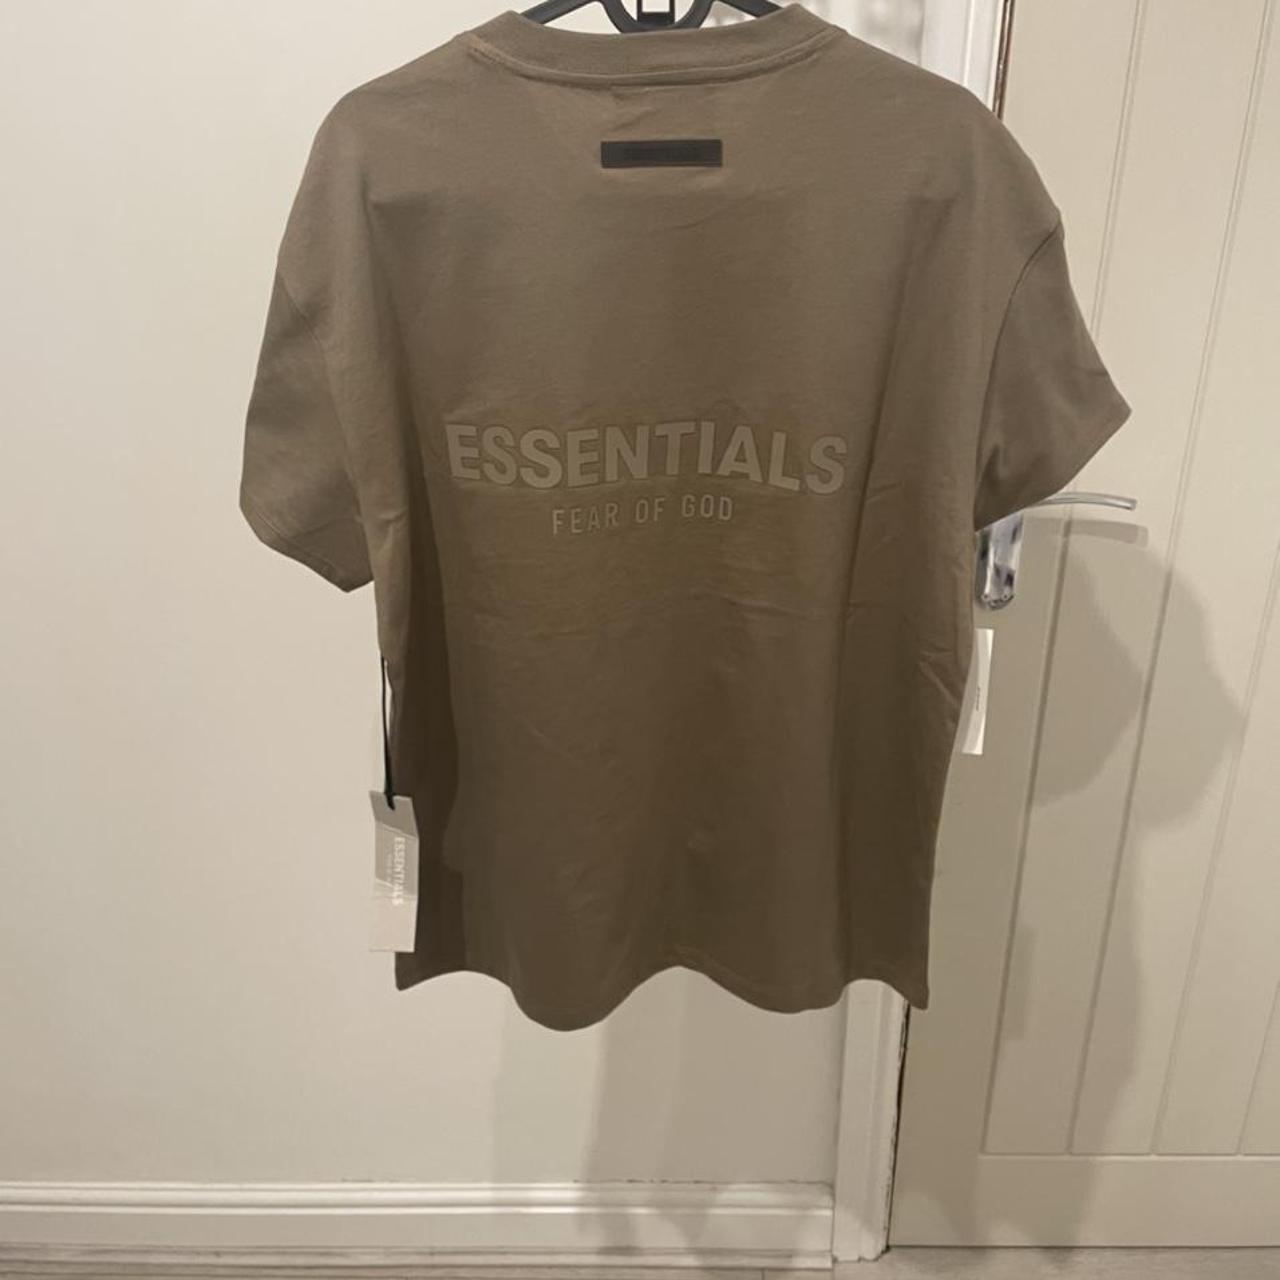 Product Image 2 - FEAR OF GOD ESSENTIALS TEE
Logo-Print